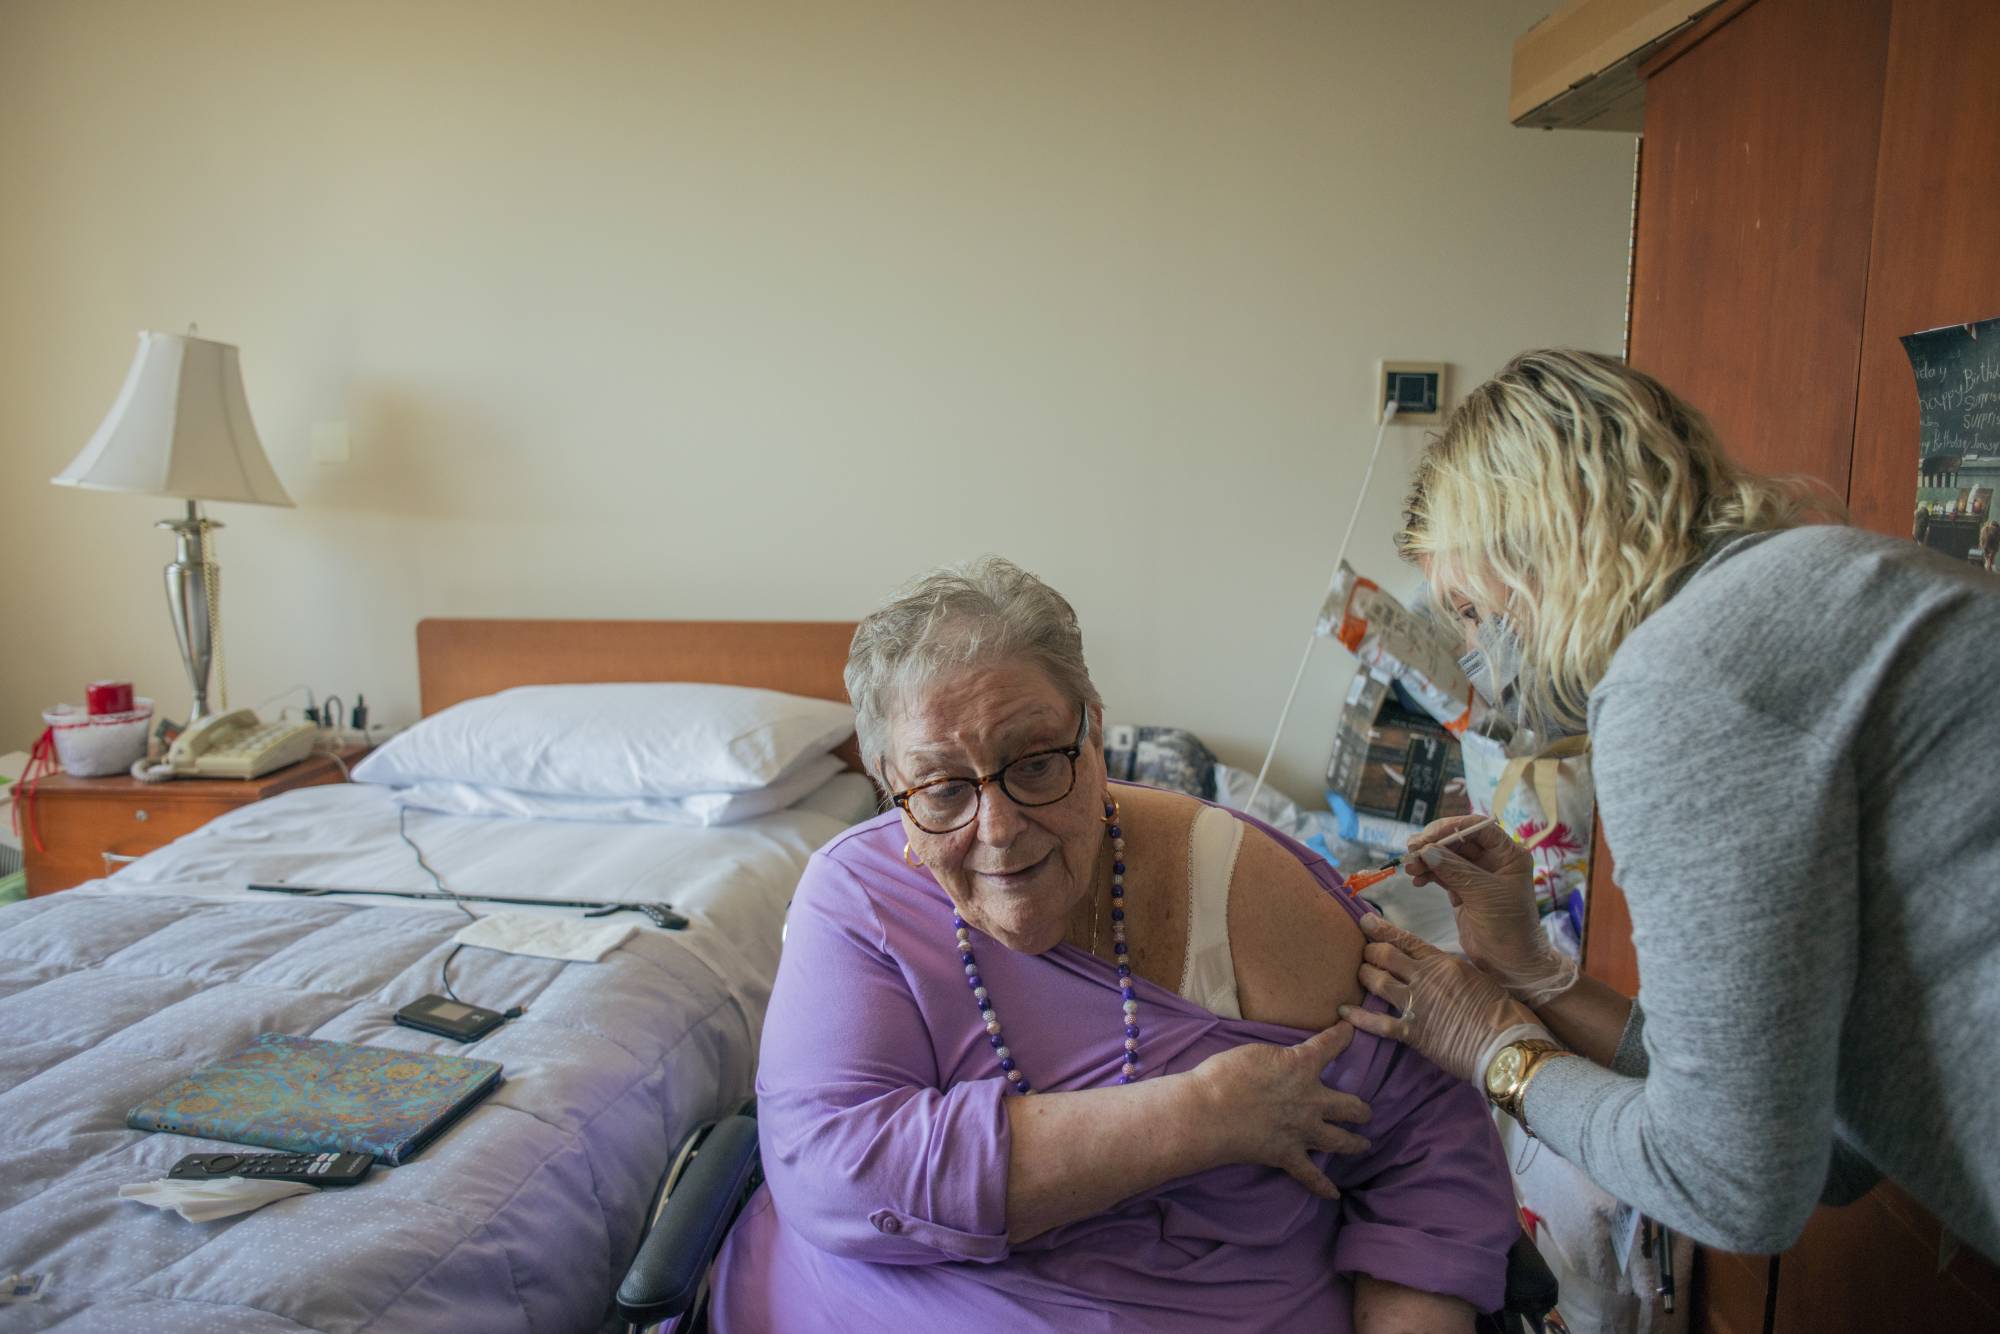 A patient receives the new omicron booster shot at a nursing home in the Bronx, New York, in mid September. | ANDREW SENG / THE NEW YORK TIMES